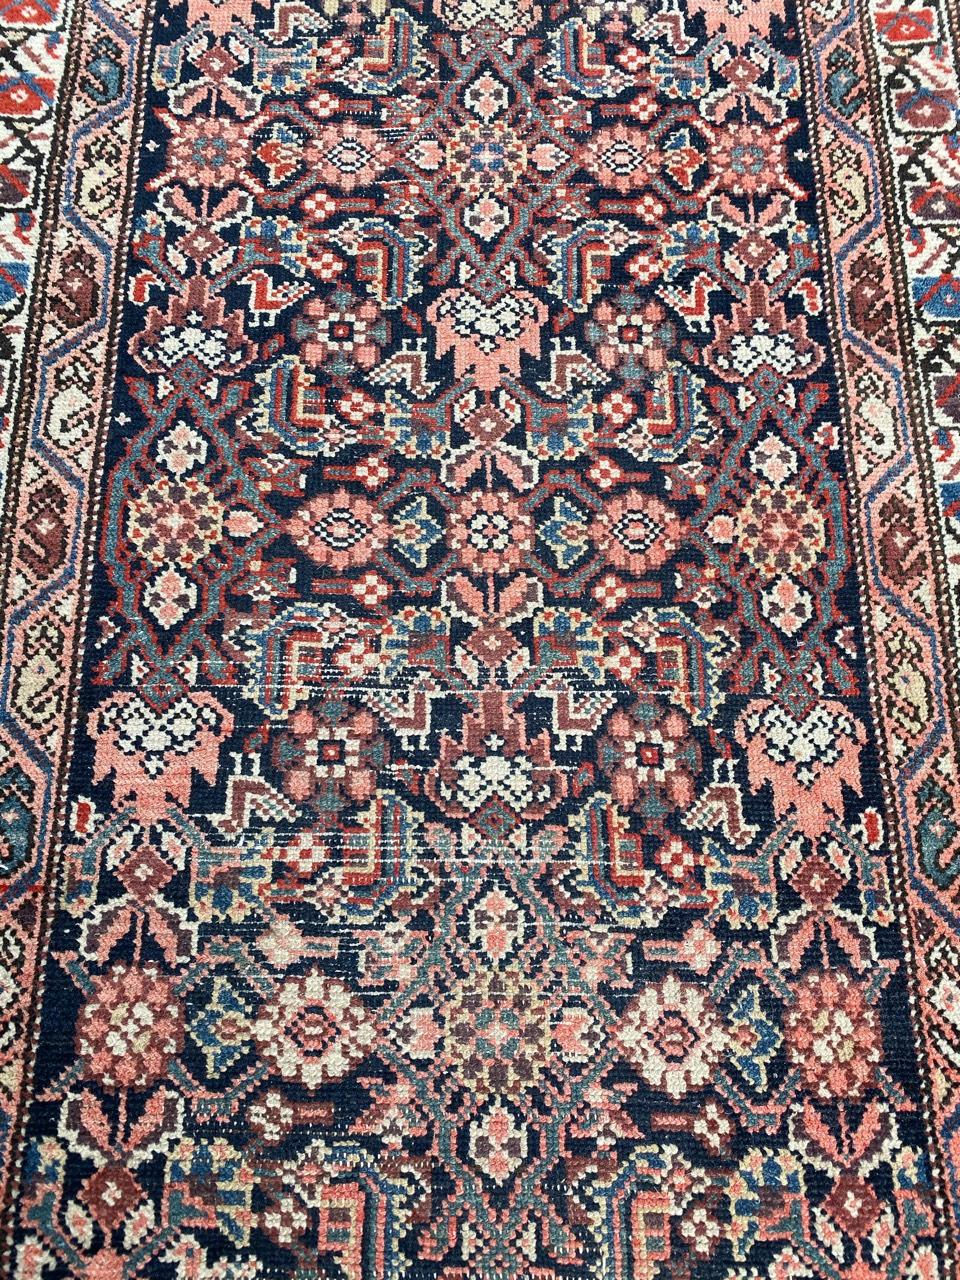 Nice late 19th century runner with beautiful Herati design and beautiful natural colors with blue, pink, orange, brown, yellow and green, entirely hand knotted with wool velvet on cotton foundation.

✨✨✨
